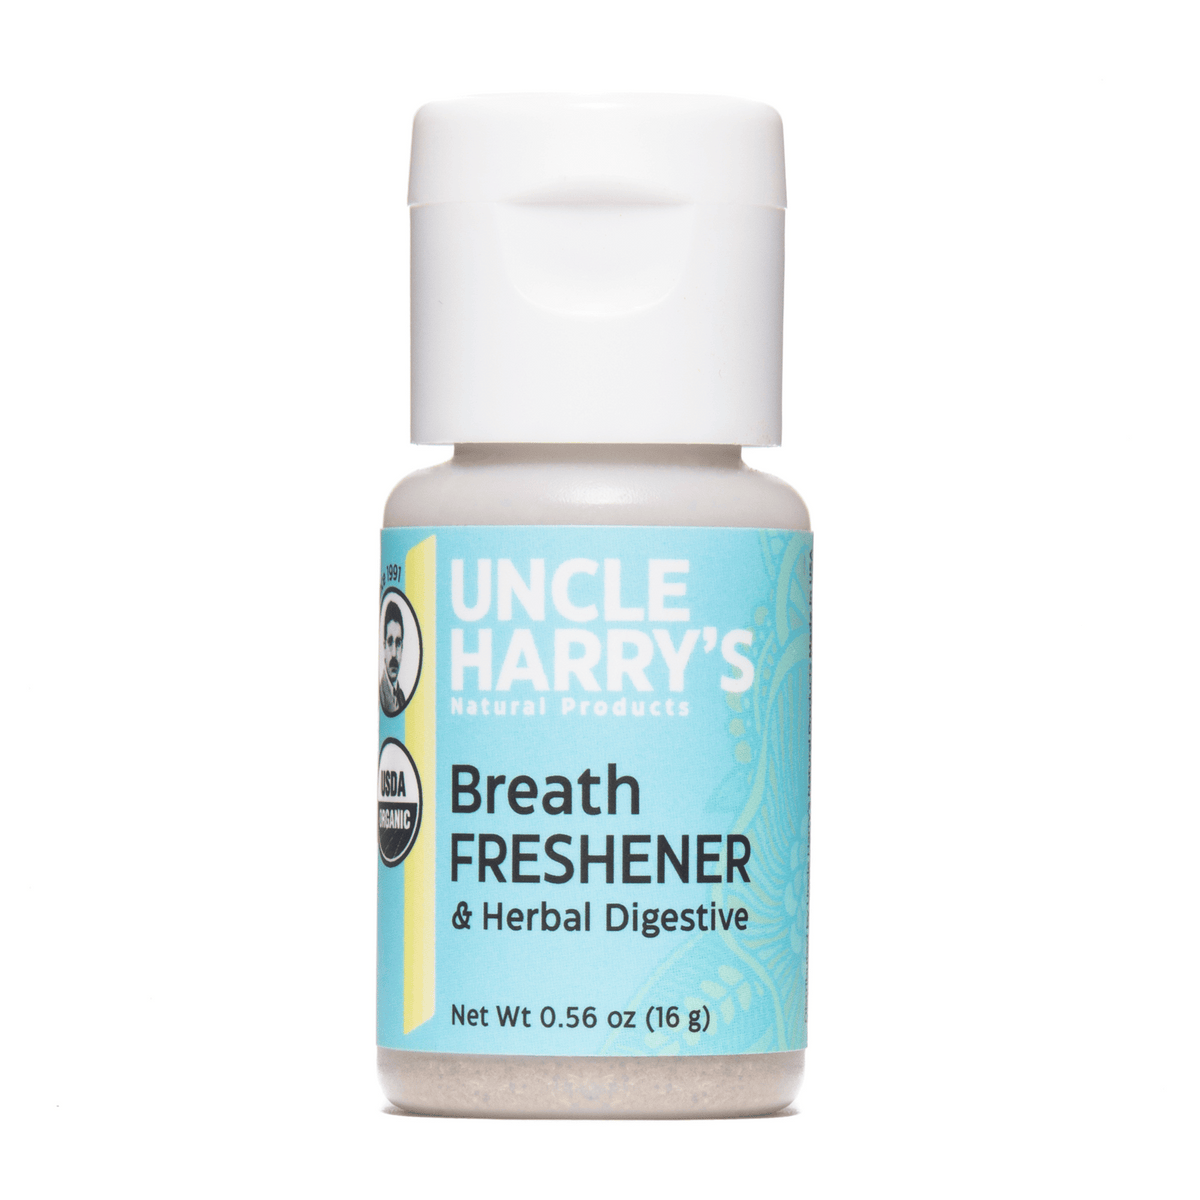 Primary Image of Natural Breath Freshener and Herbal Digestive